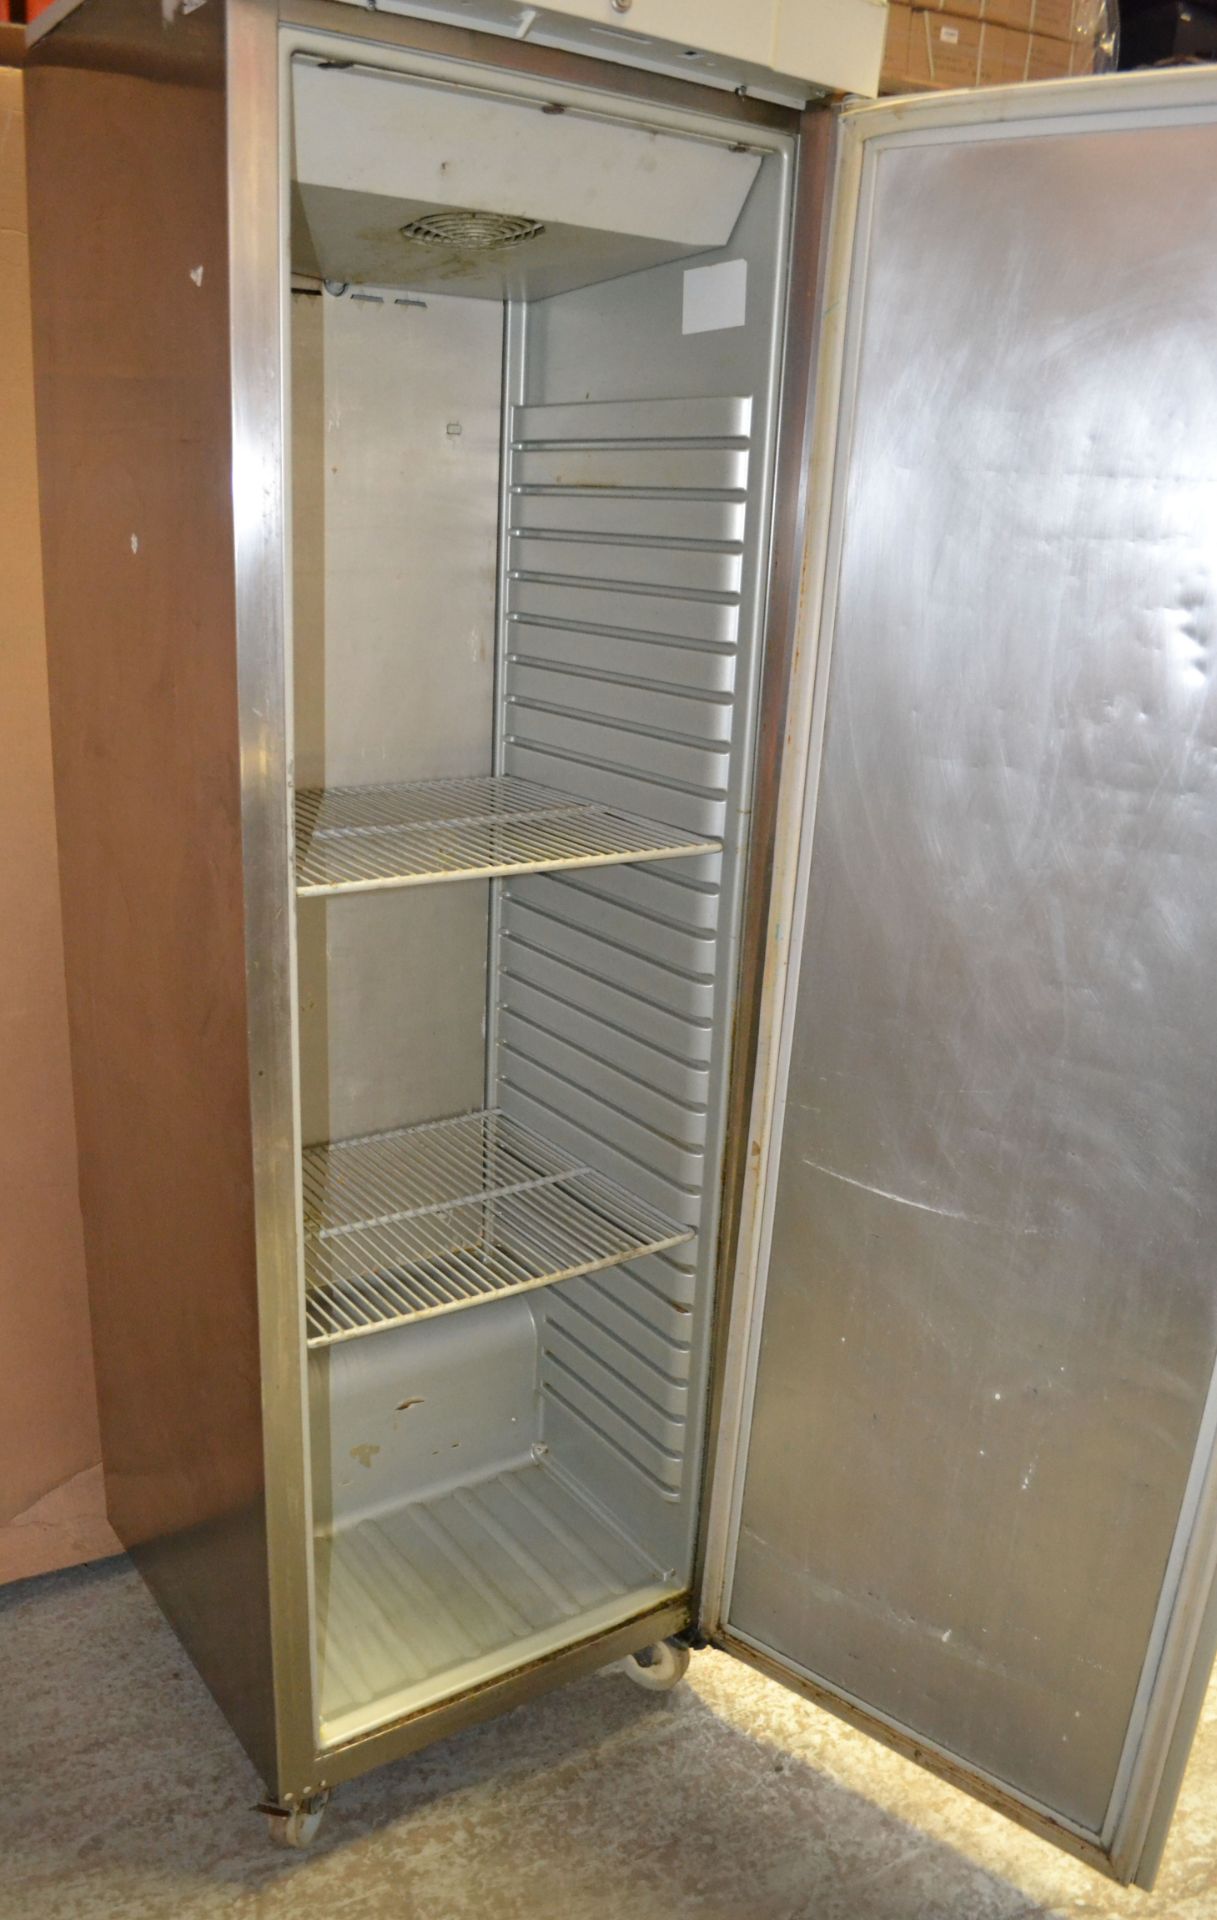 1 x Gram Tall Upright Commercial Freezer - 60x605x190cm - Ref: HM206 - CL261 - Location: - Image 8 of 10